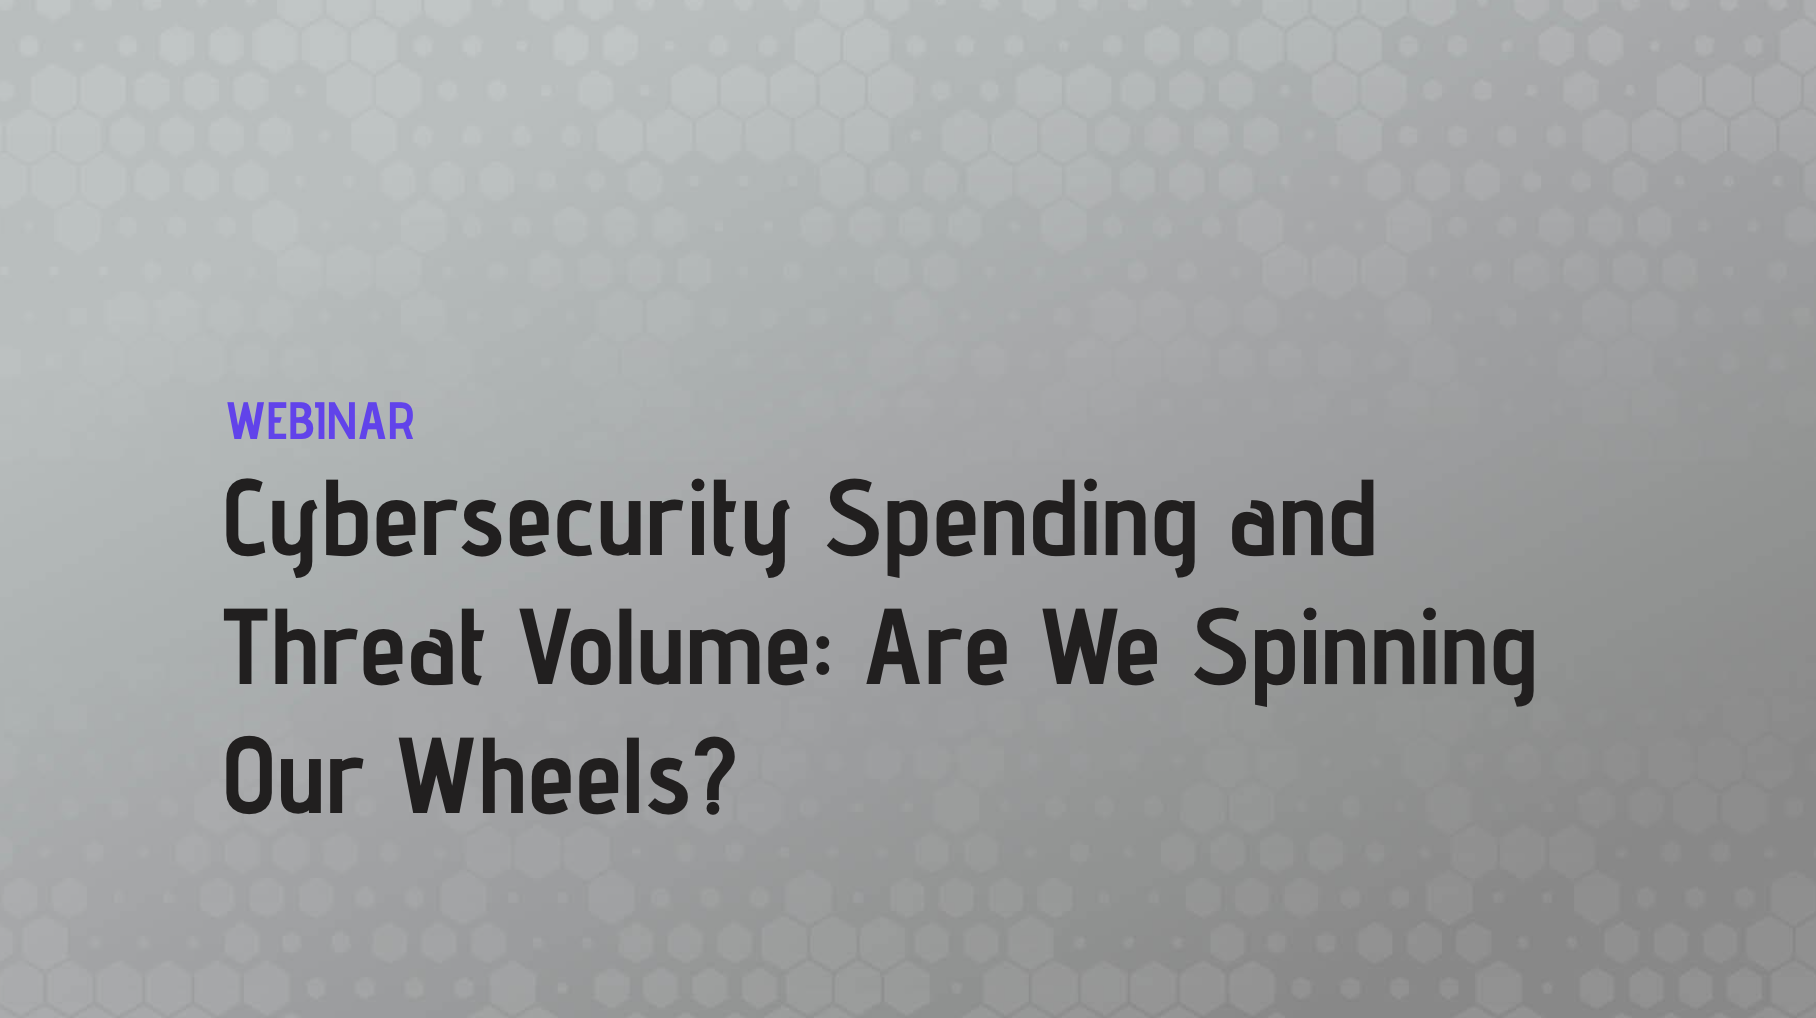 Cybersecurity Spending and Threat Volume: Are We Spinning Our Wheels?